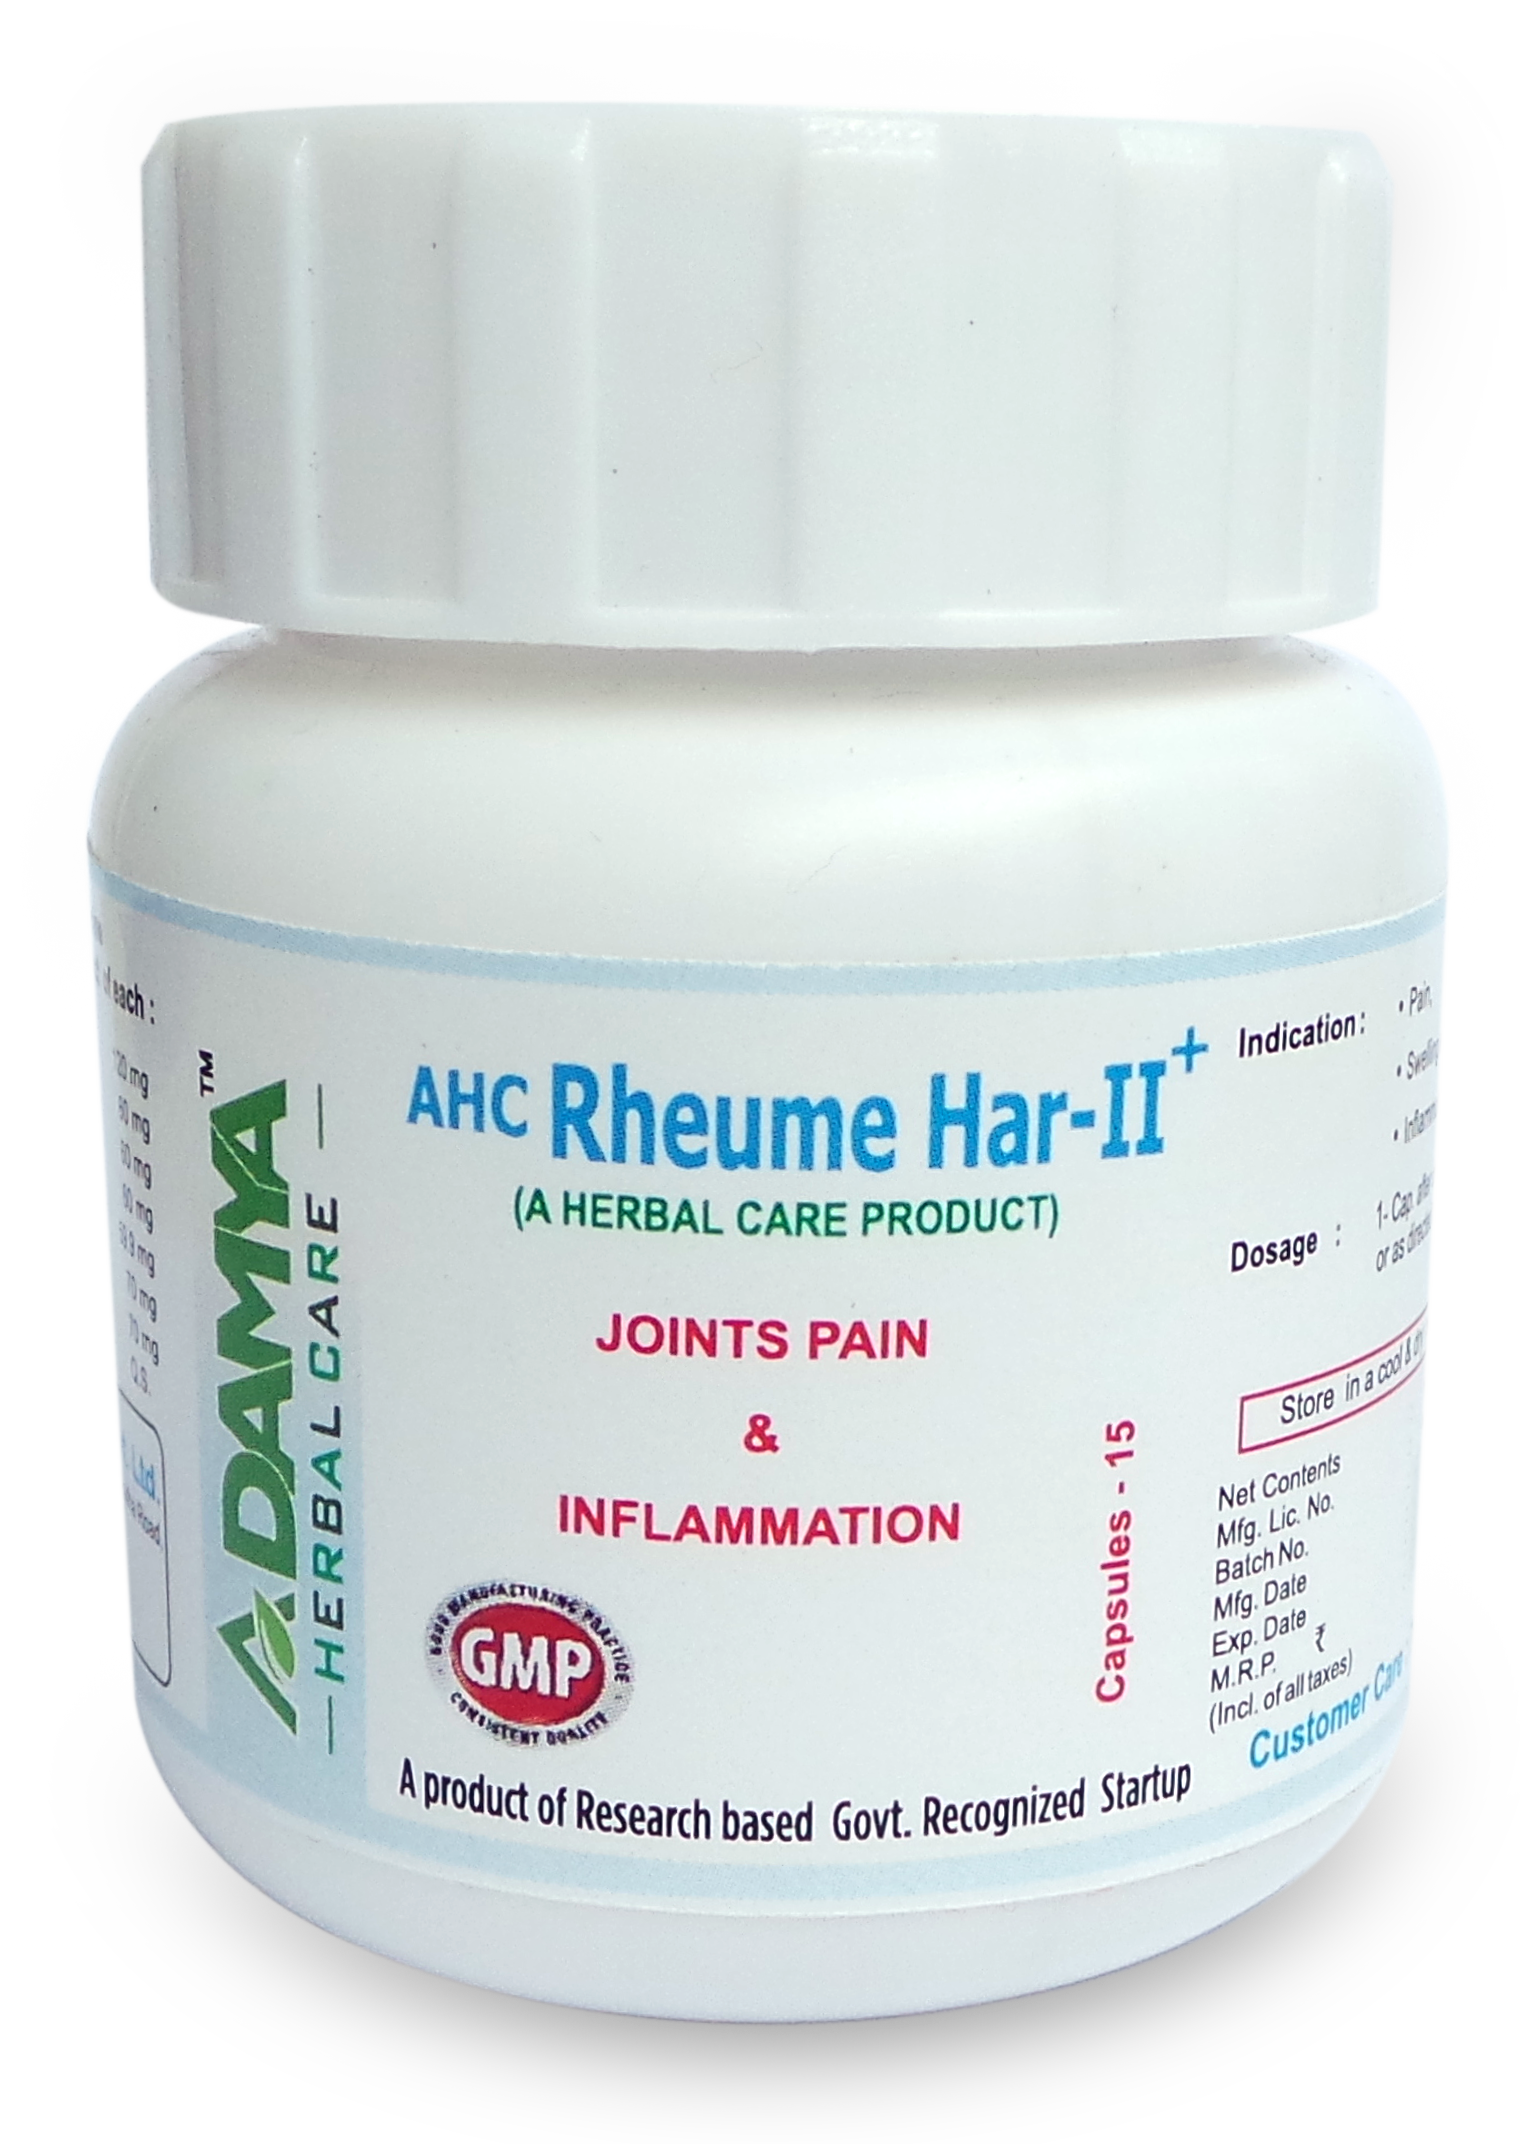 Buy AHC Rehume har II at Best Price Online